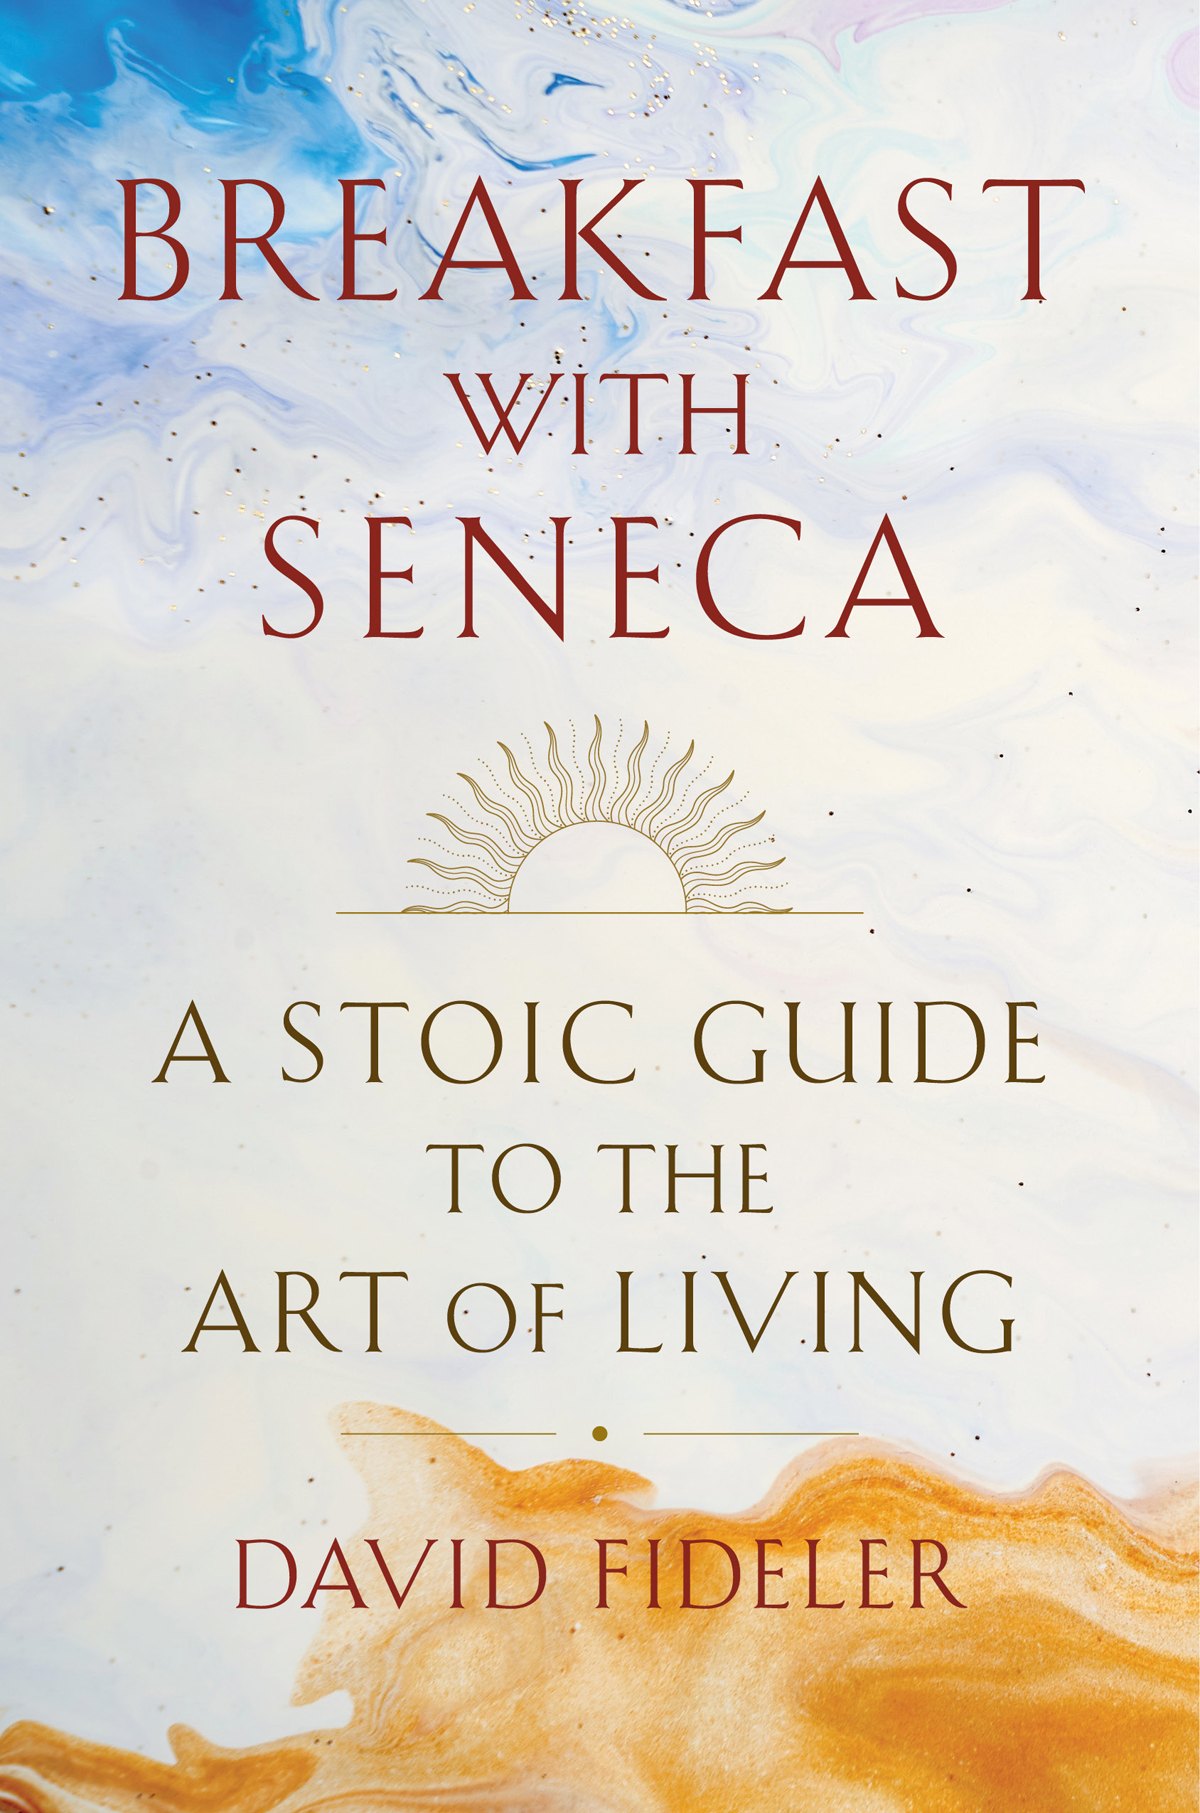 BREAKFAST WITH SENECA A Stoic Guide to the Art of Living DAVID FIDELER - photo 1